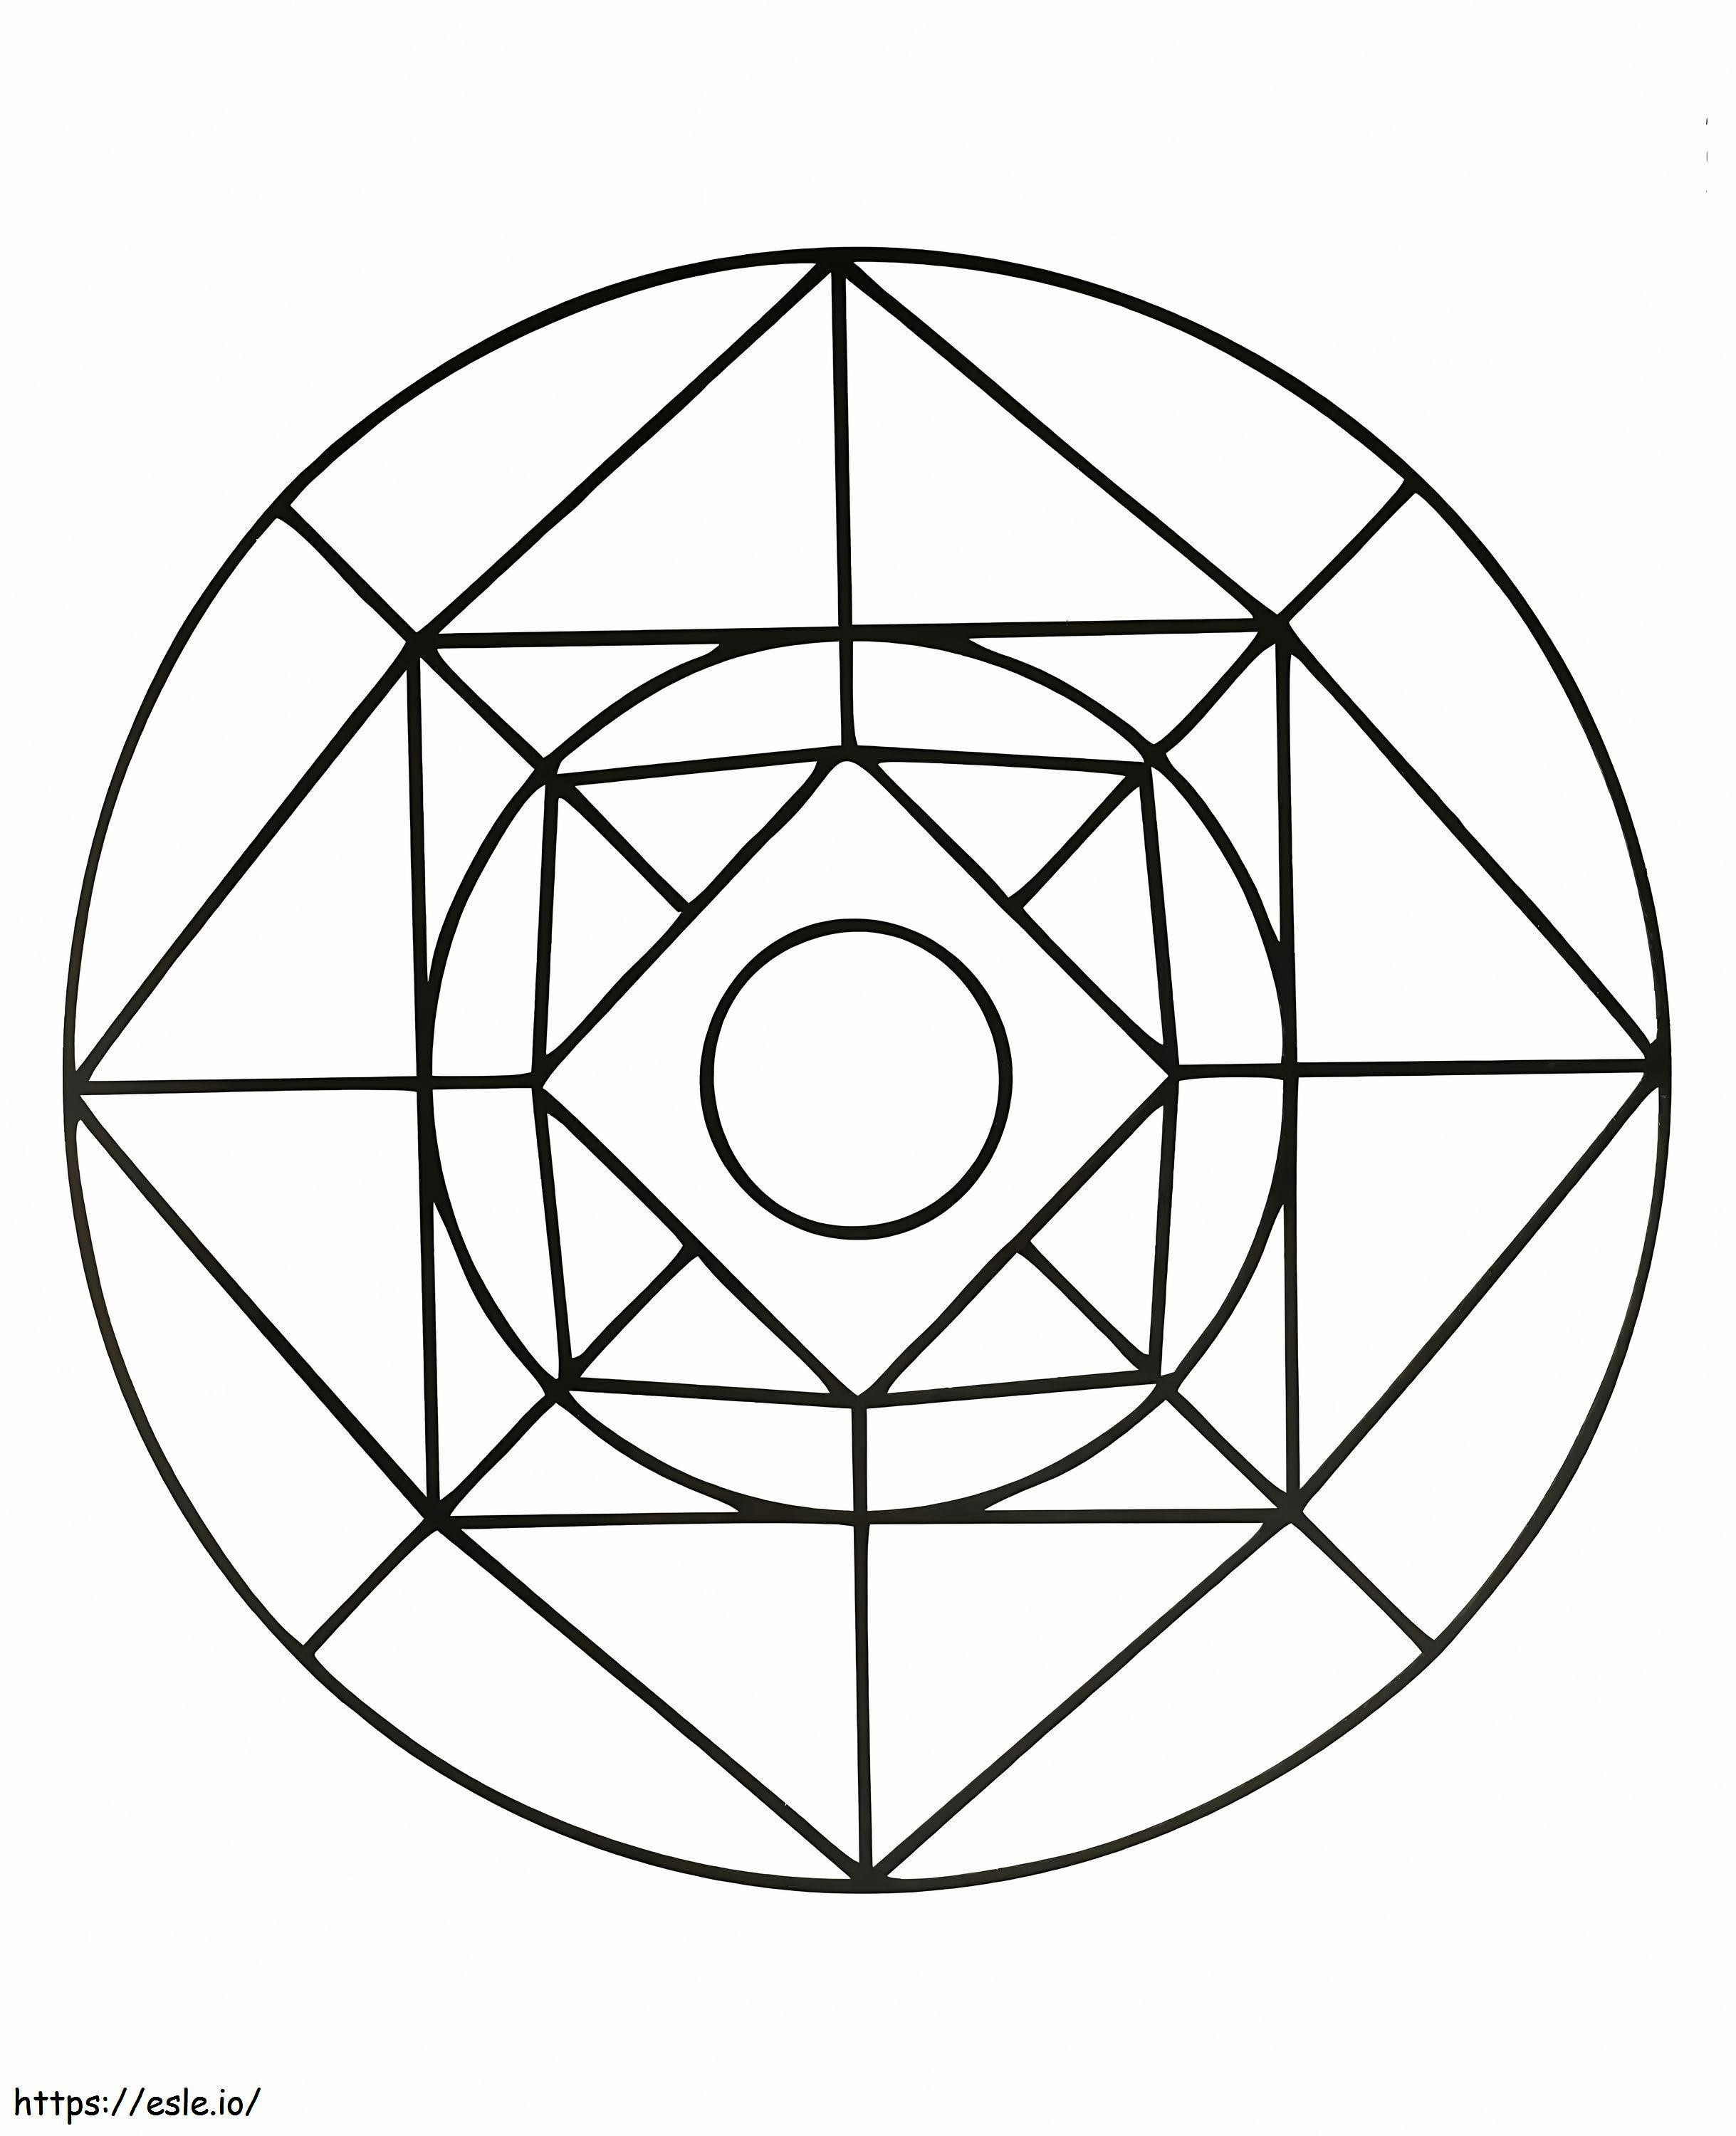 Geometric Square And Circle coloring page